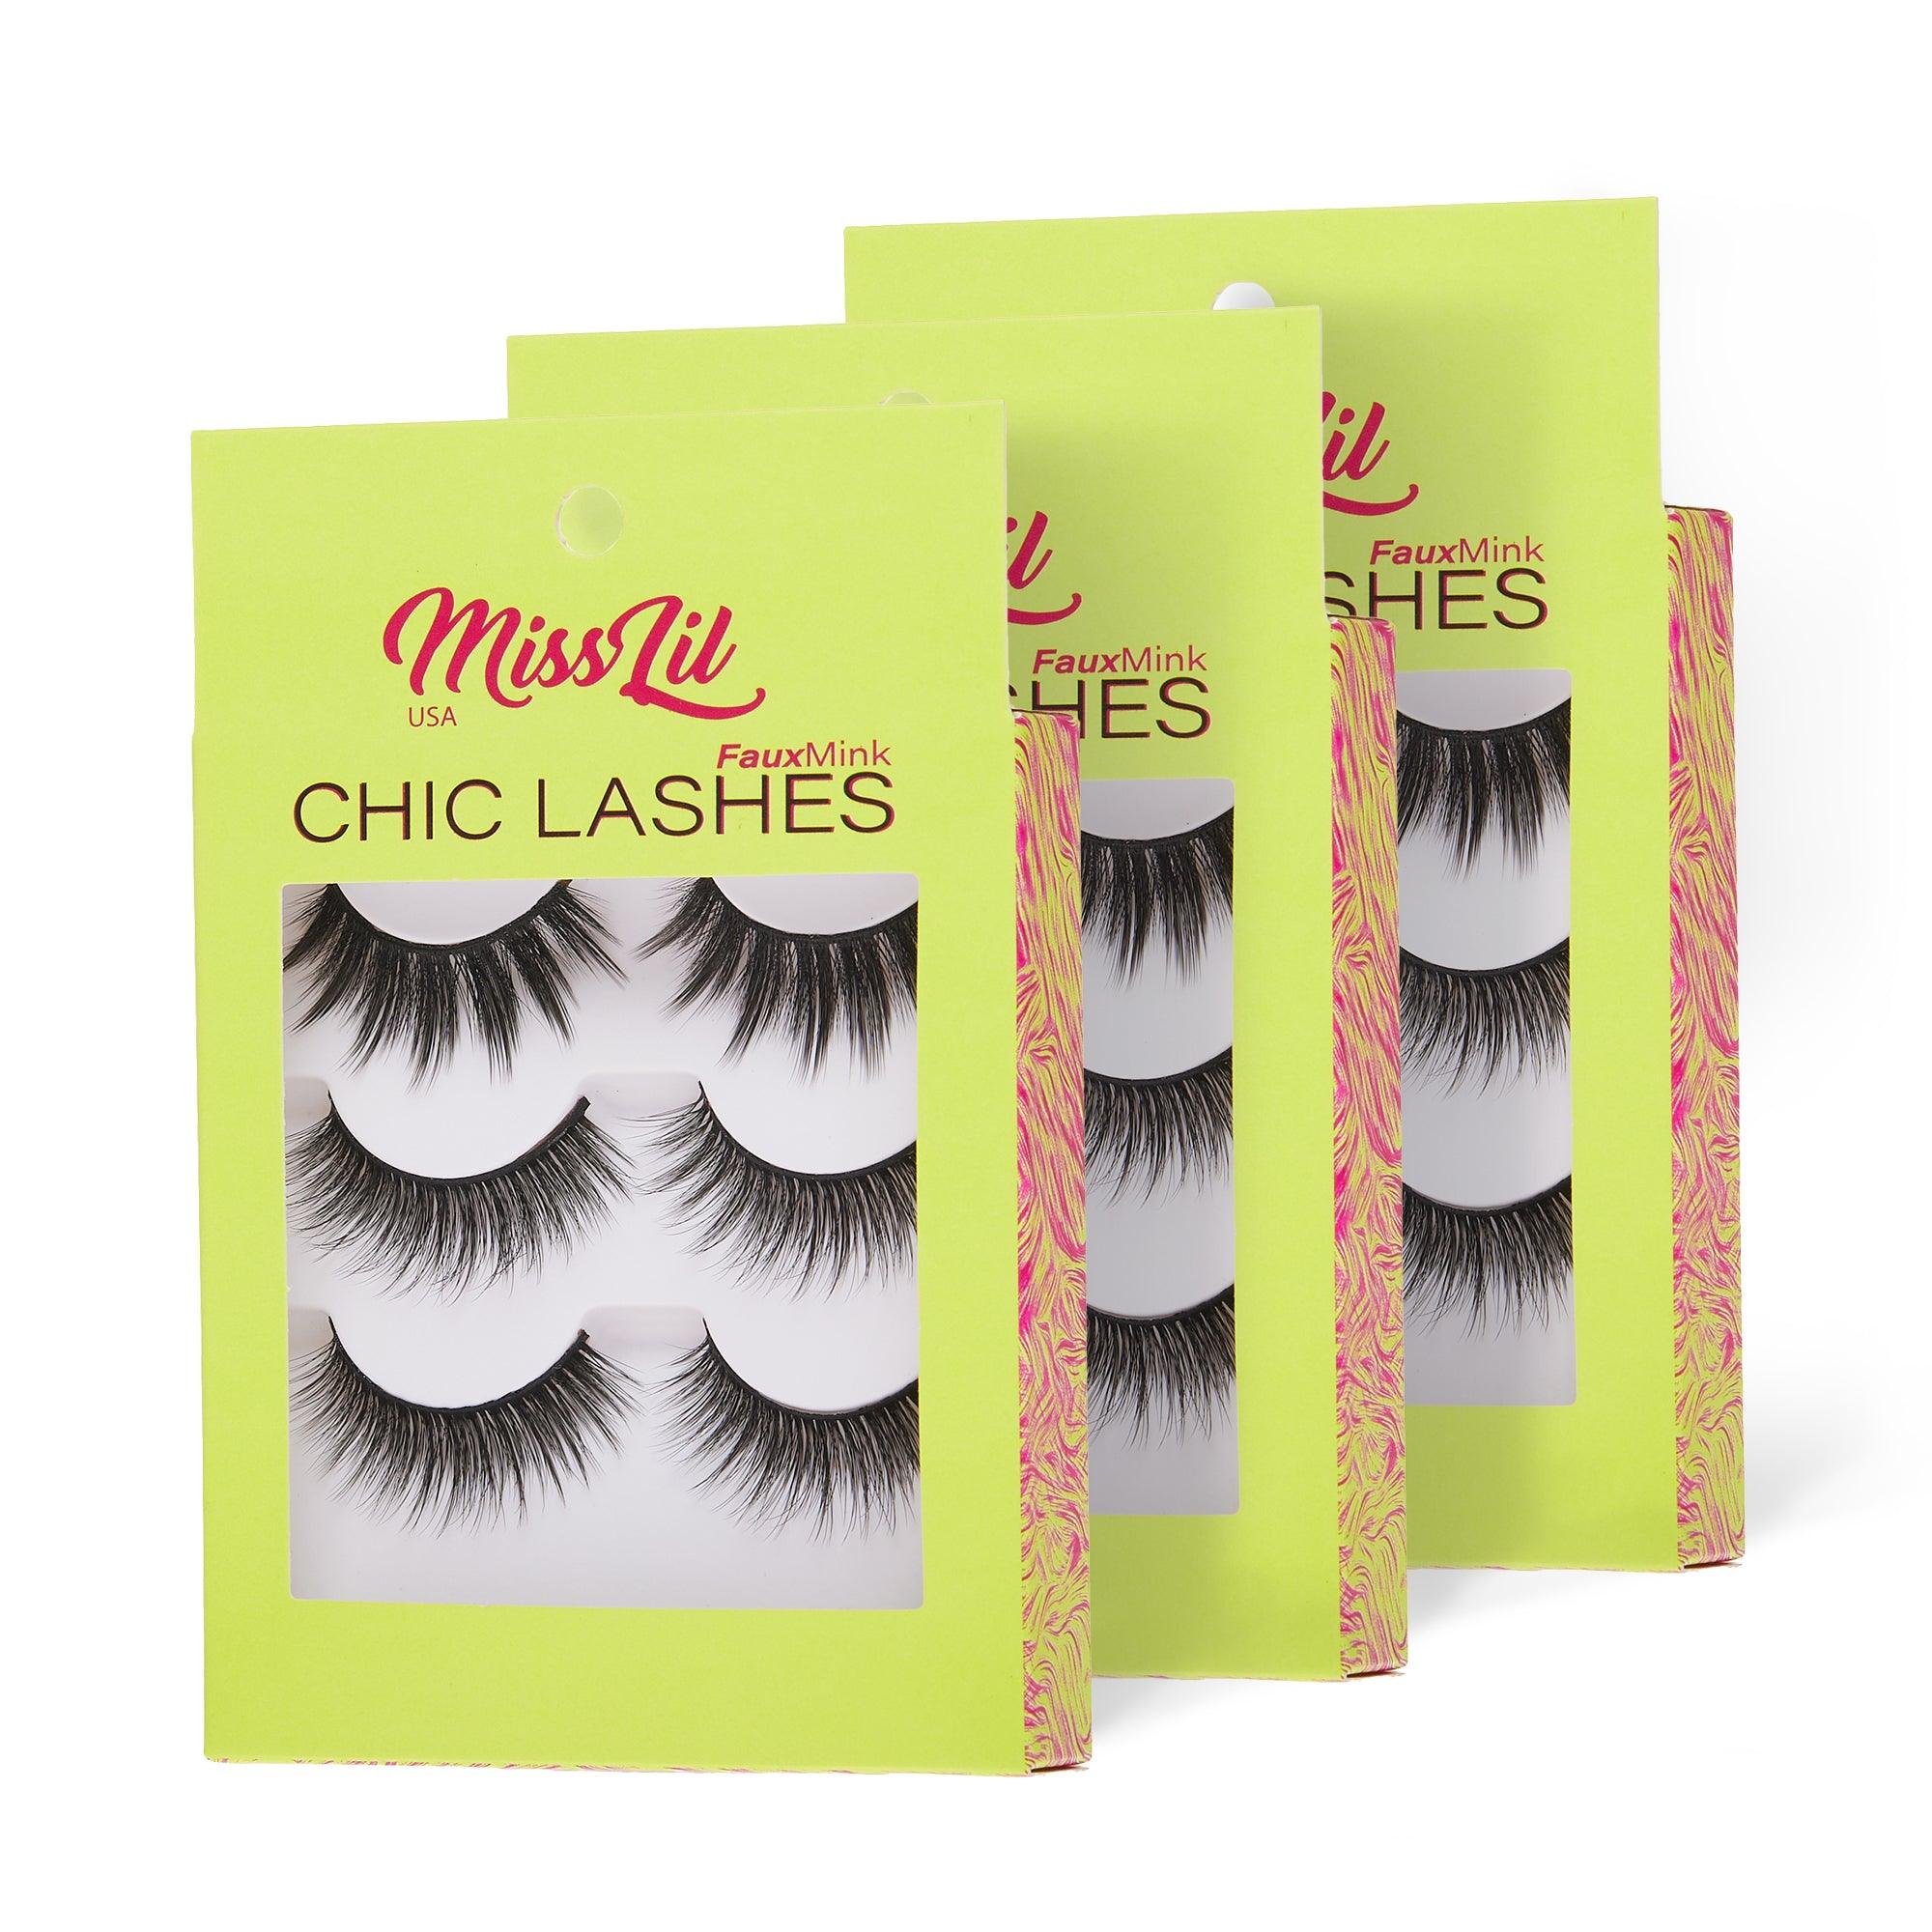 3-Pairs Lashes-Chic Lashes Collection #33 (Pack of 12) - Miss Lil USA Wholesale